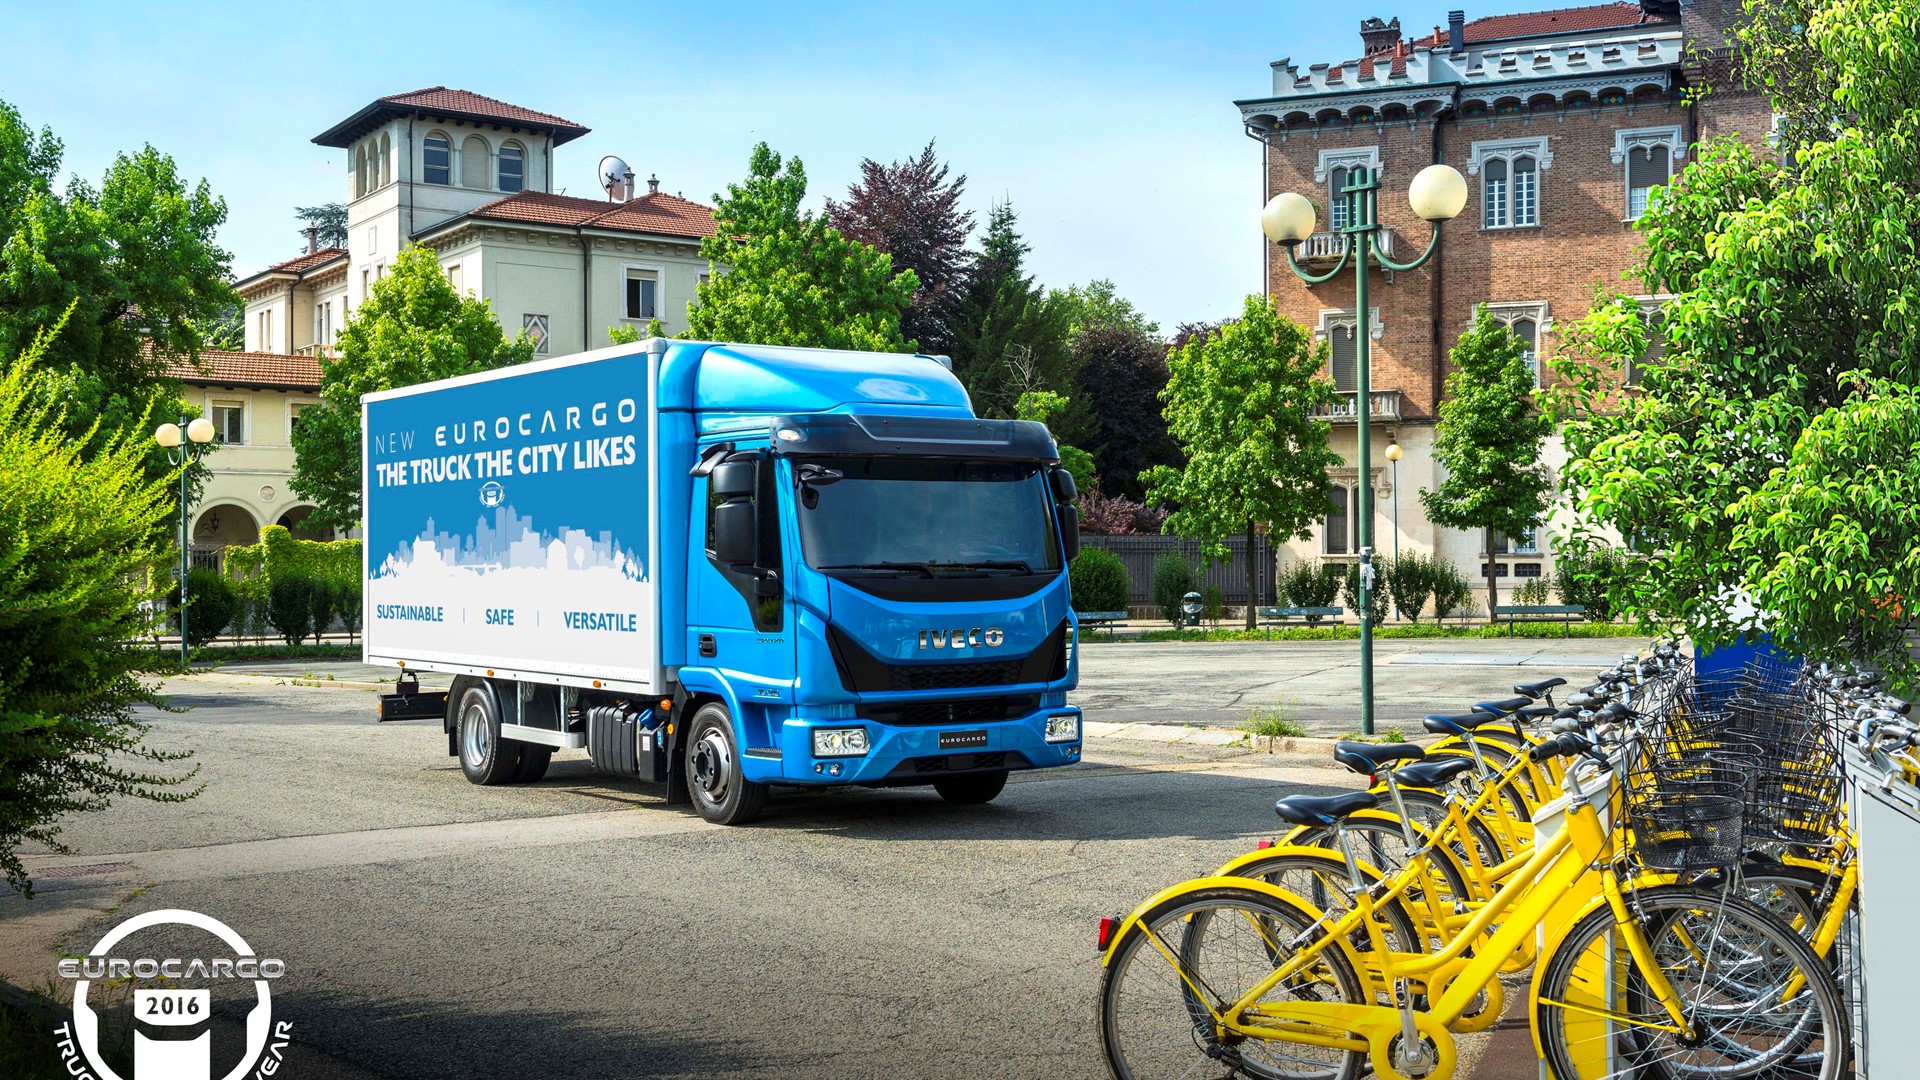 The Iveco Eurocargo Truck of the Year